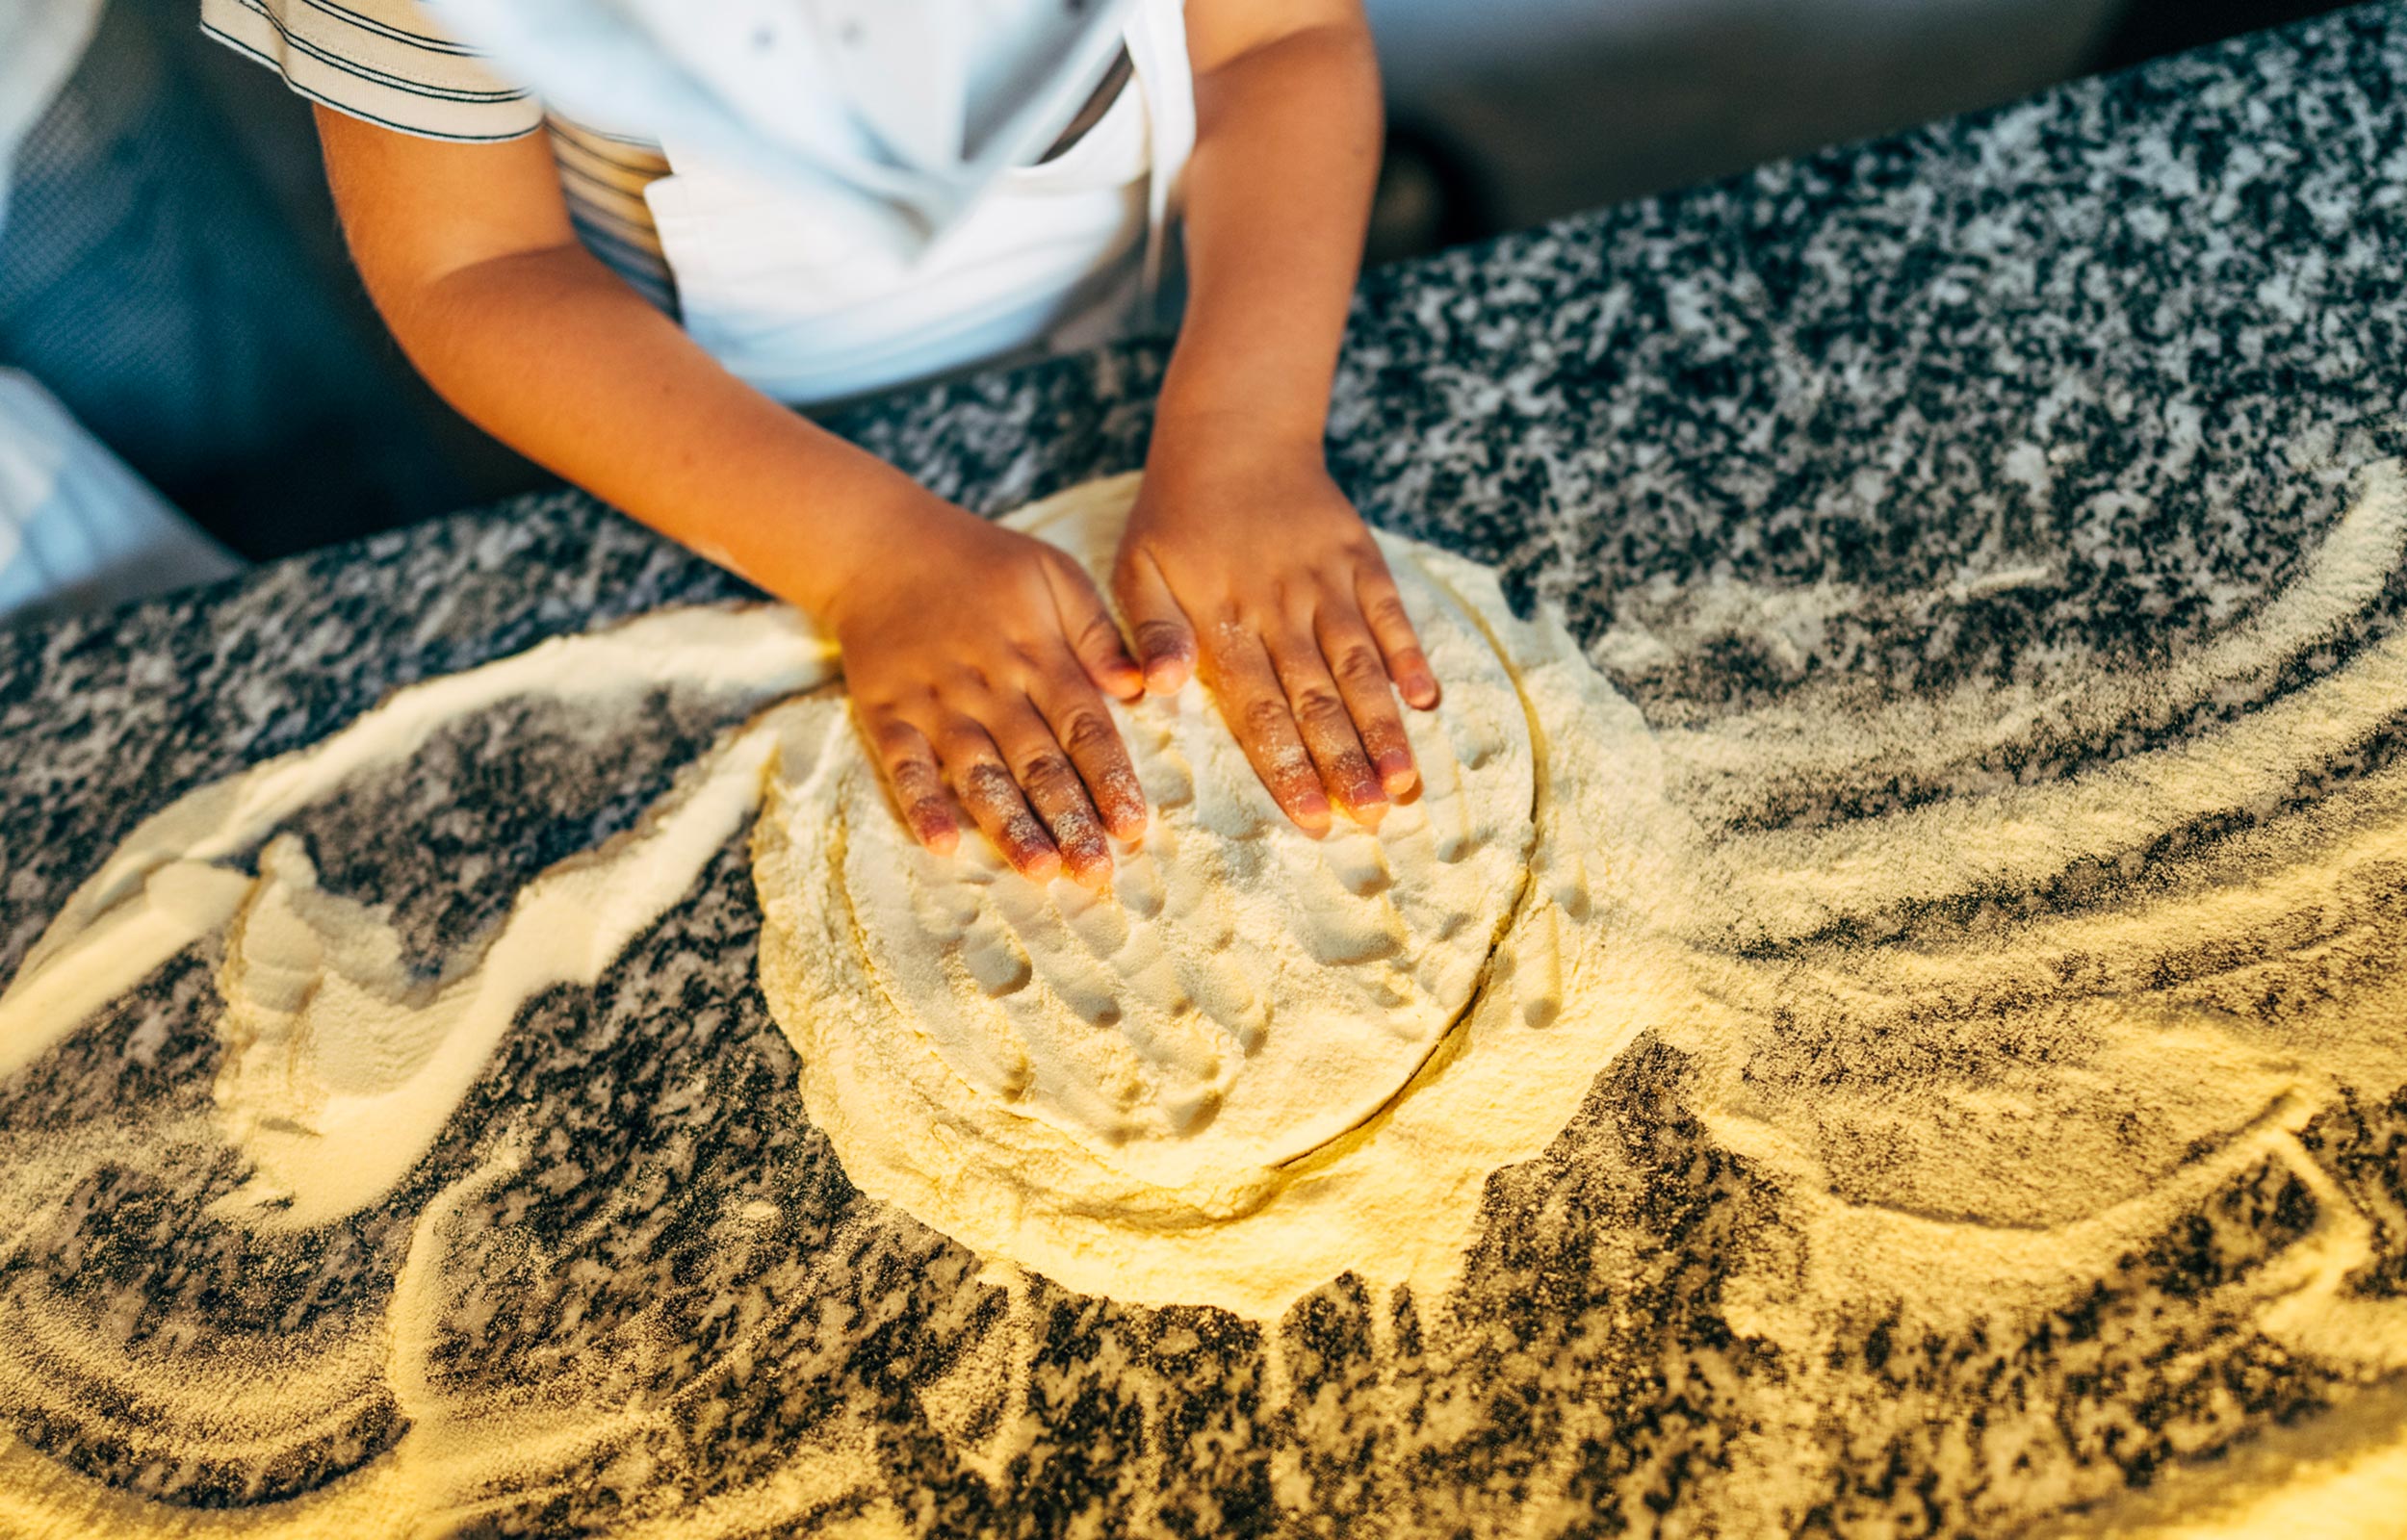 A child kneading and rolling out the pizza dough by hand, using lots of flour